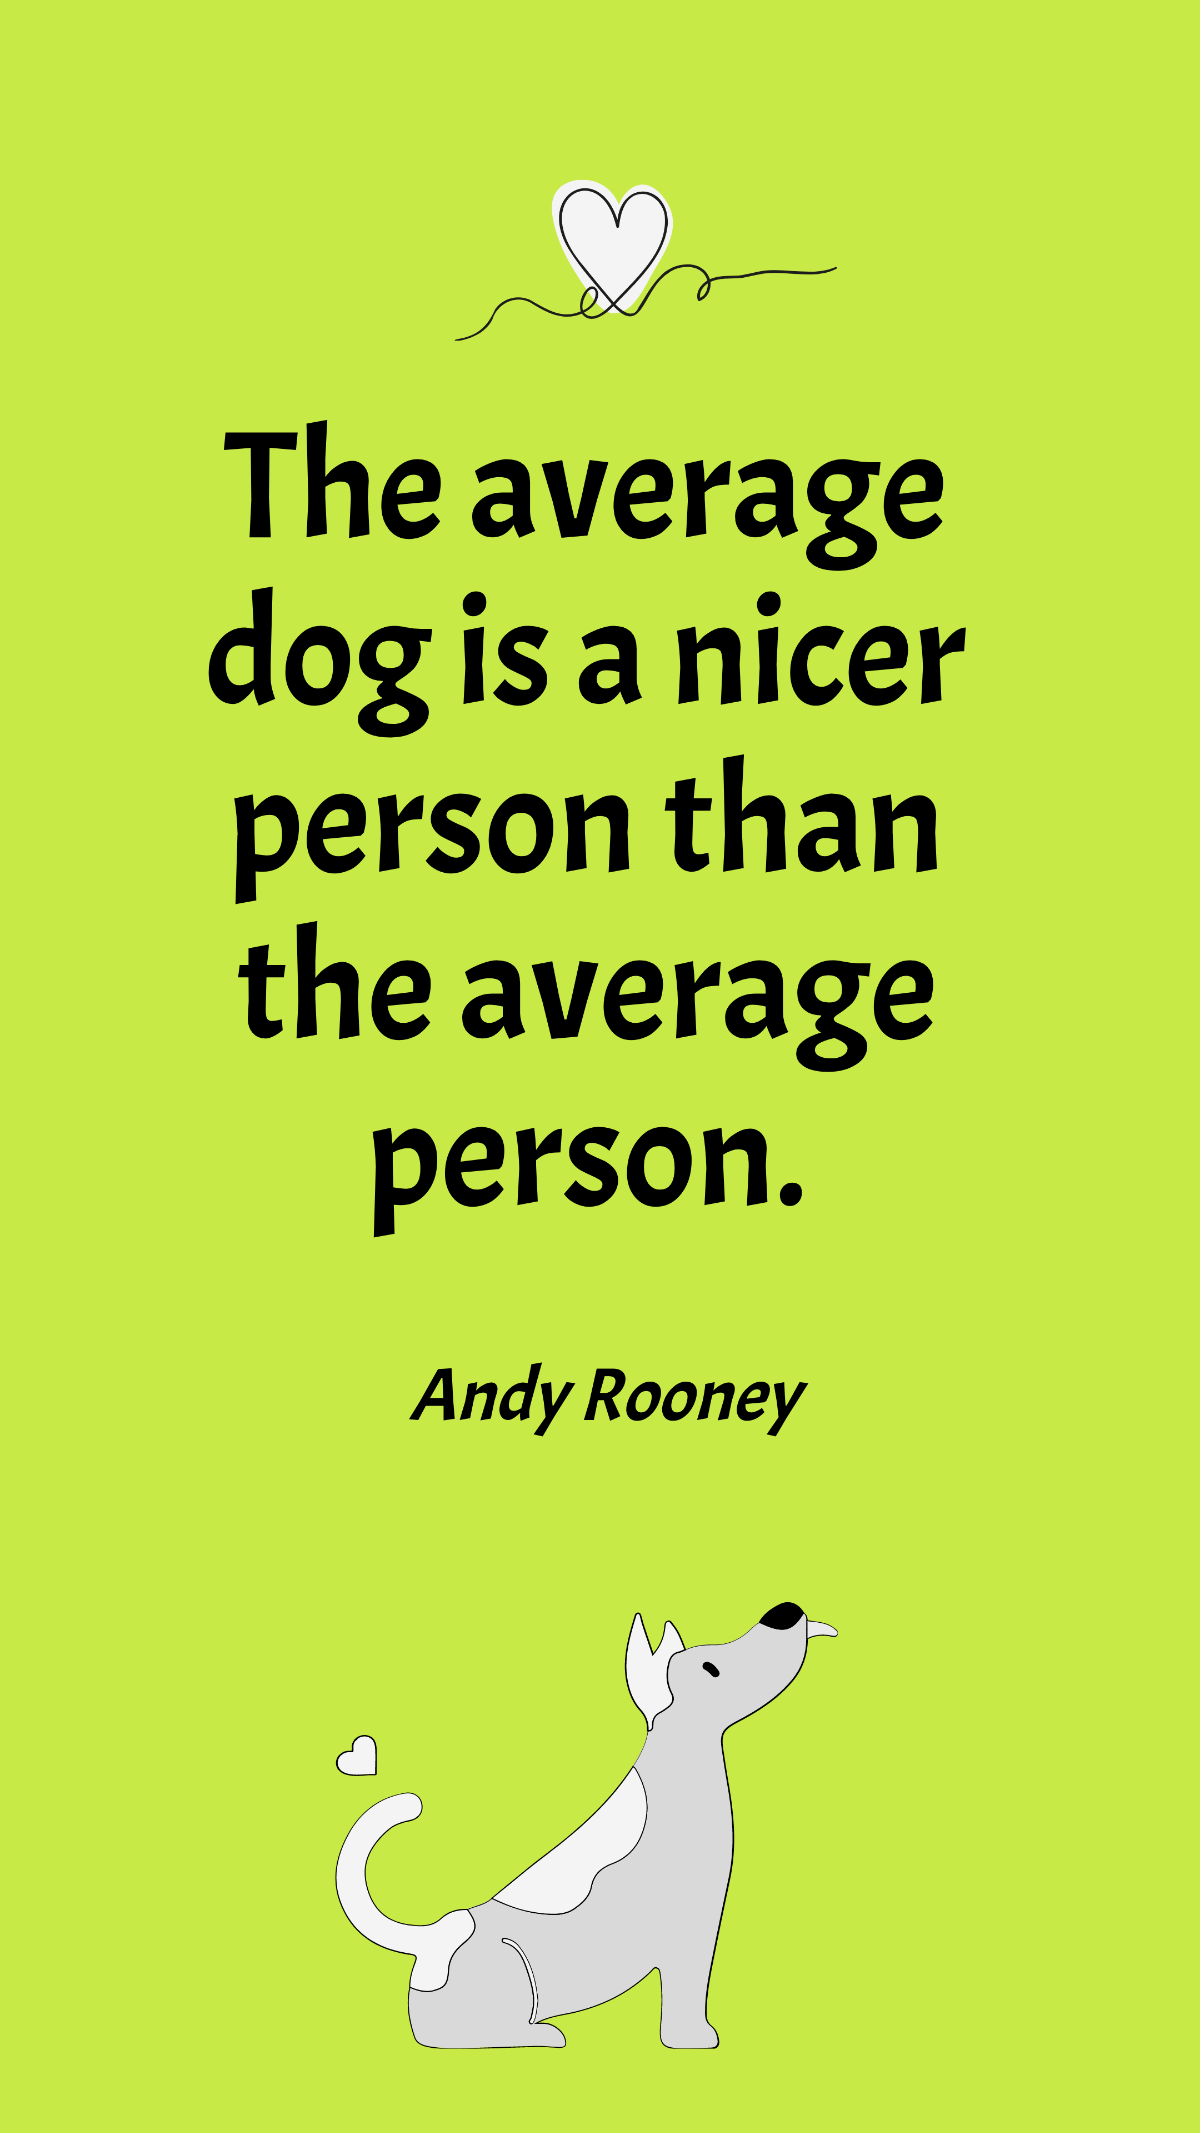 Andy Rooney - The average dog is a nicer person than the average person.